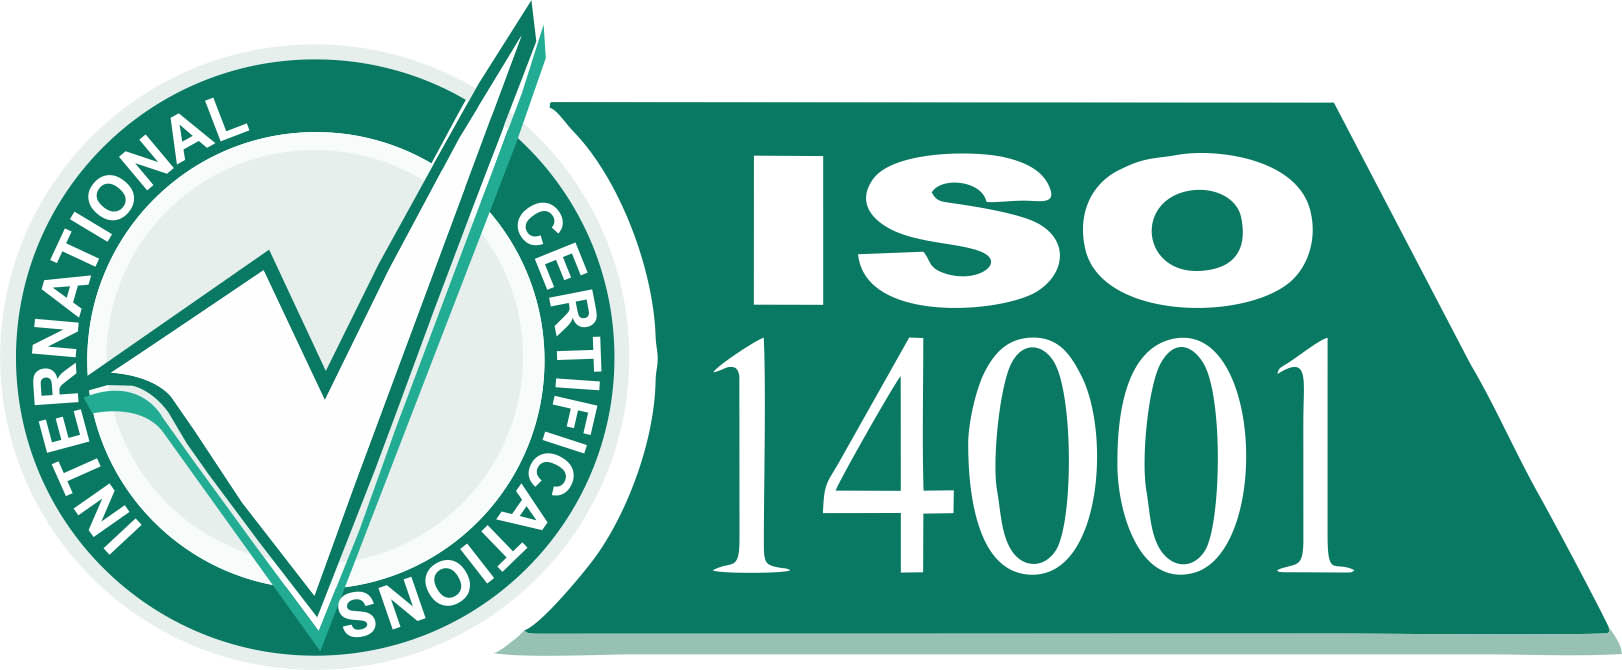 FORMATION ISO 14001 